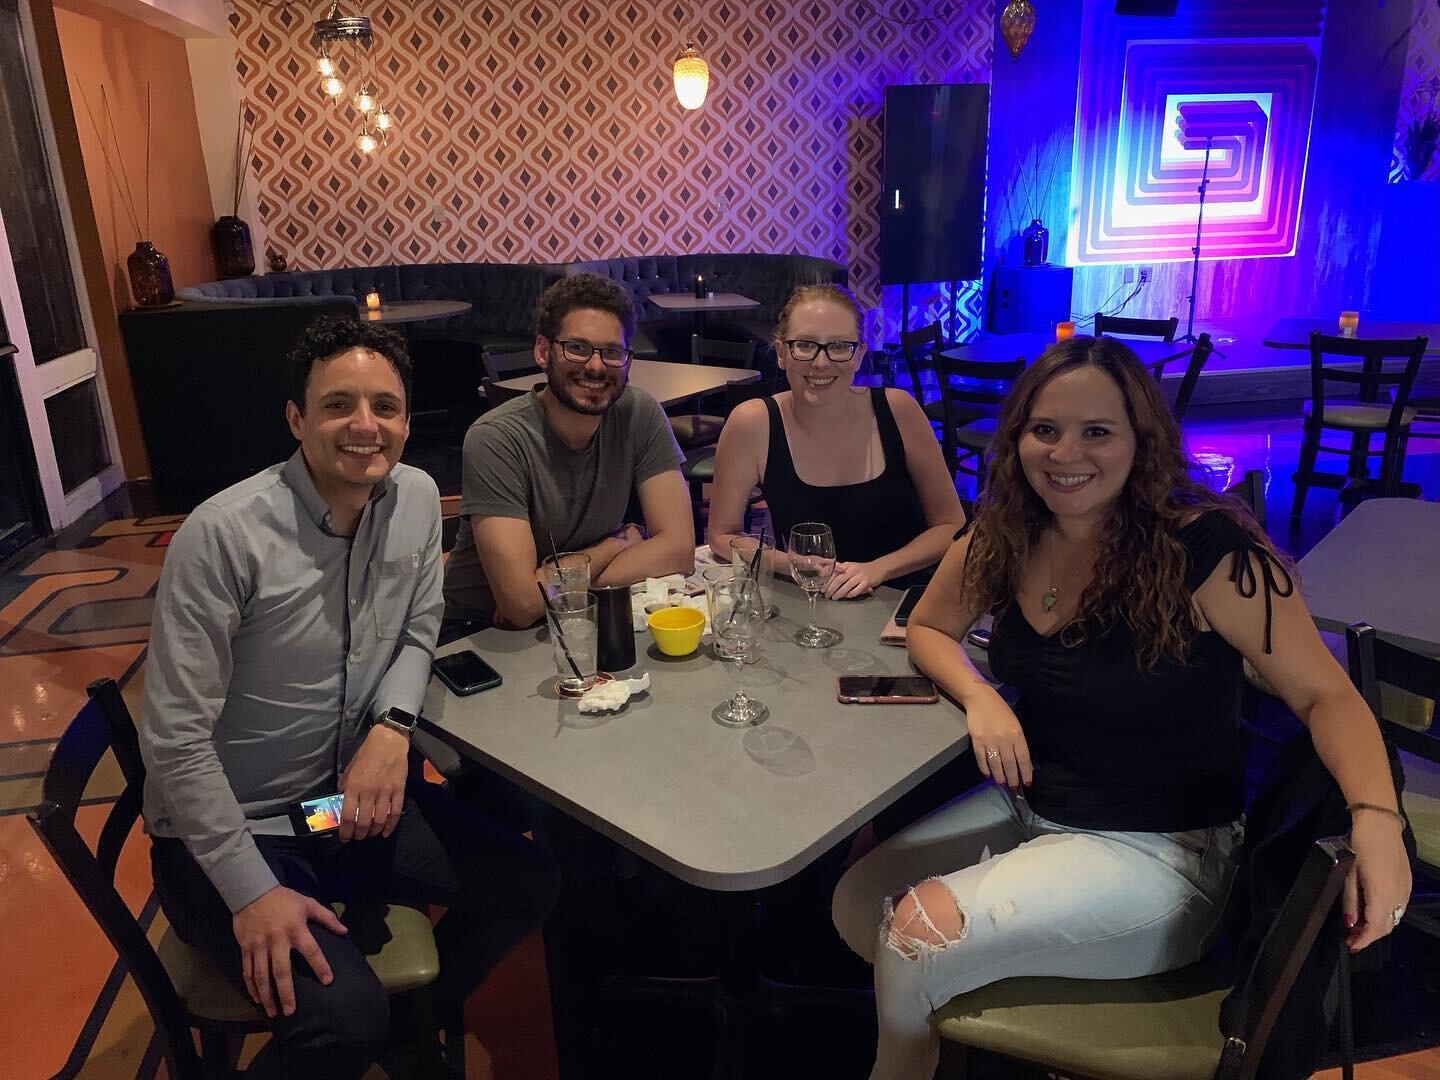 We made history tonight winning the first trivia night at @squarebarvegas located&hellip;you guessed it, in Assembly District 15. 

Thanks @tbrewlc for introducing this new gem to us!